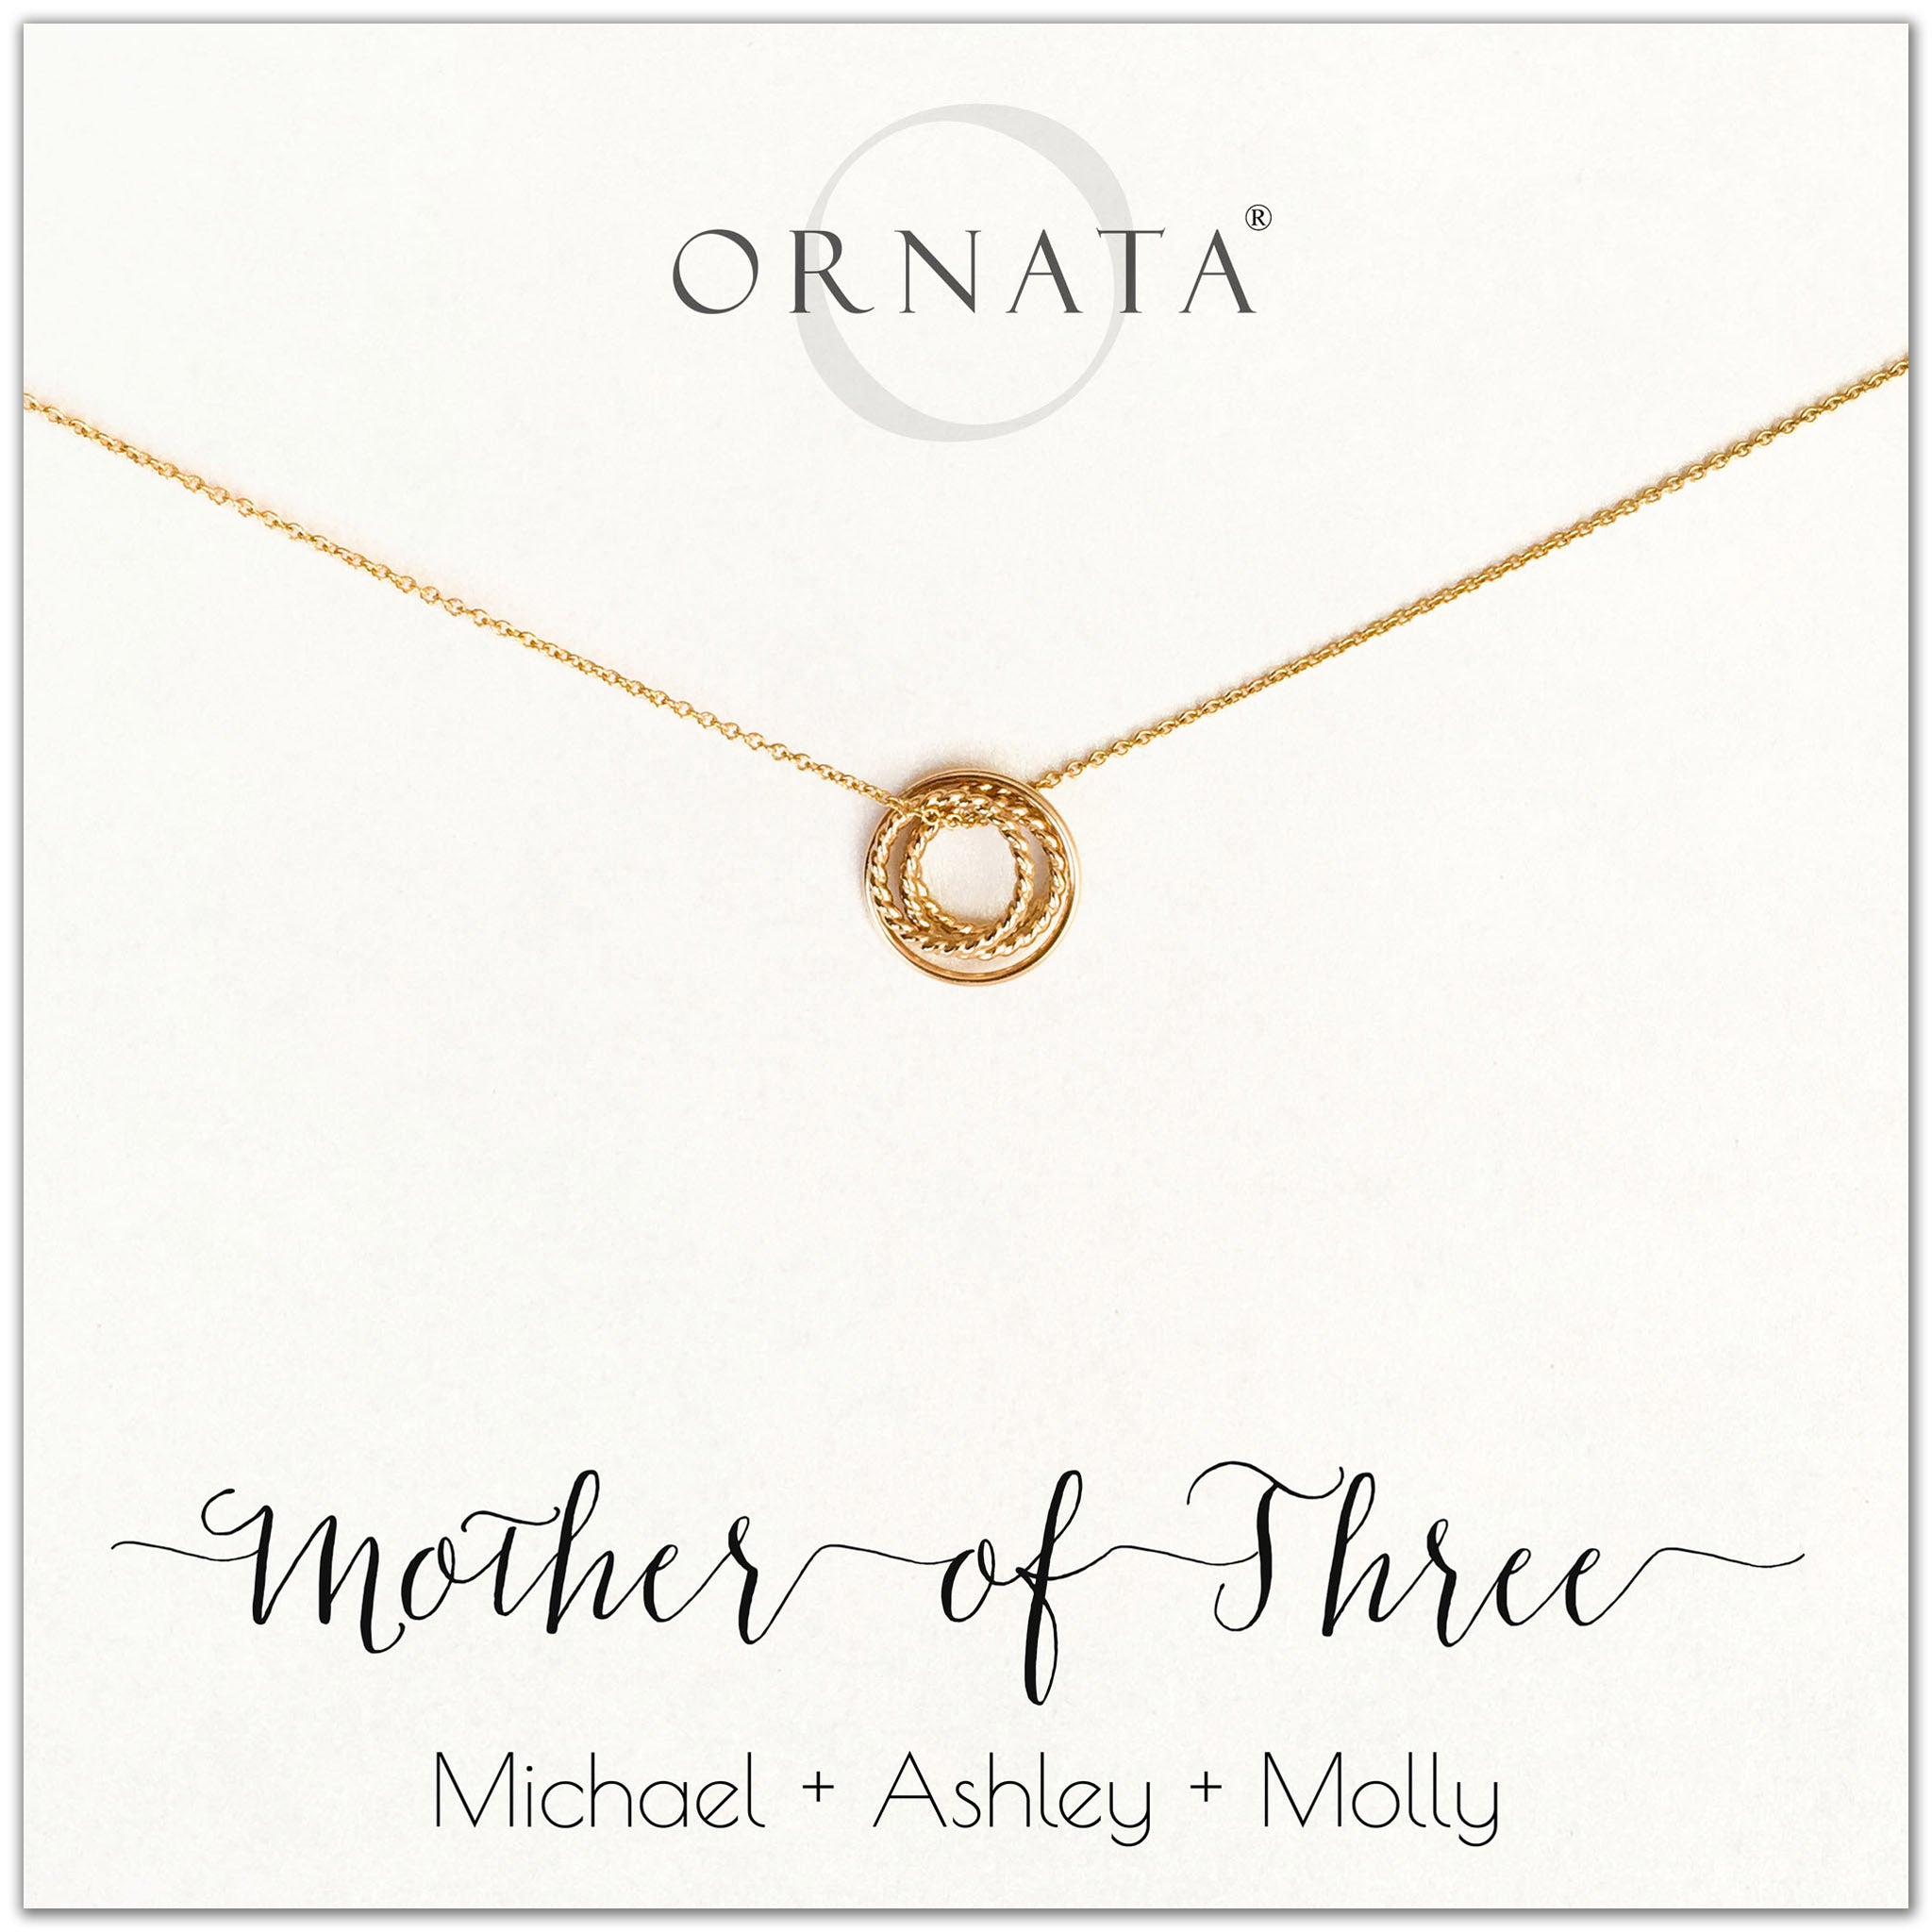 Mom or Mother of Three - personalized gold necklaces. Our 14 karat gold filled custom jewelry is a perfect gift for mothers of three children, daughters, granddaughters, grandmothers, sisters, best friends, wives, girlfriends, and family members. Also a good gift for Mother’s Day. 